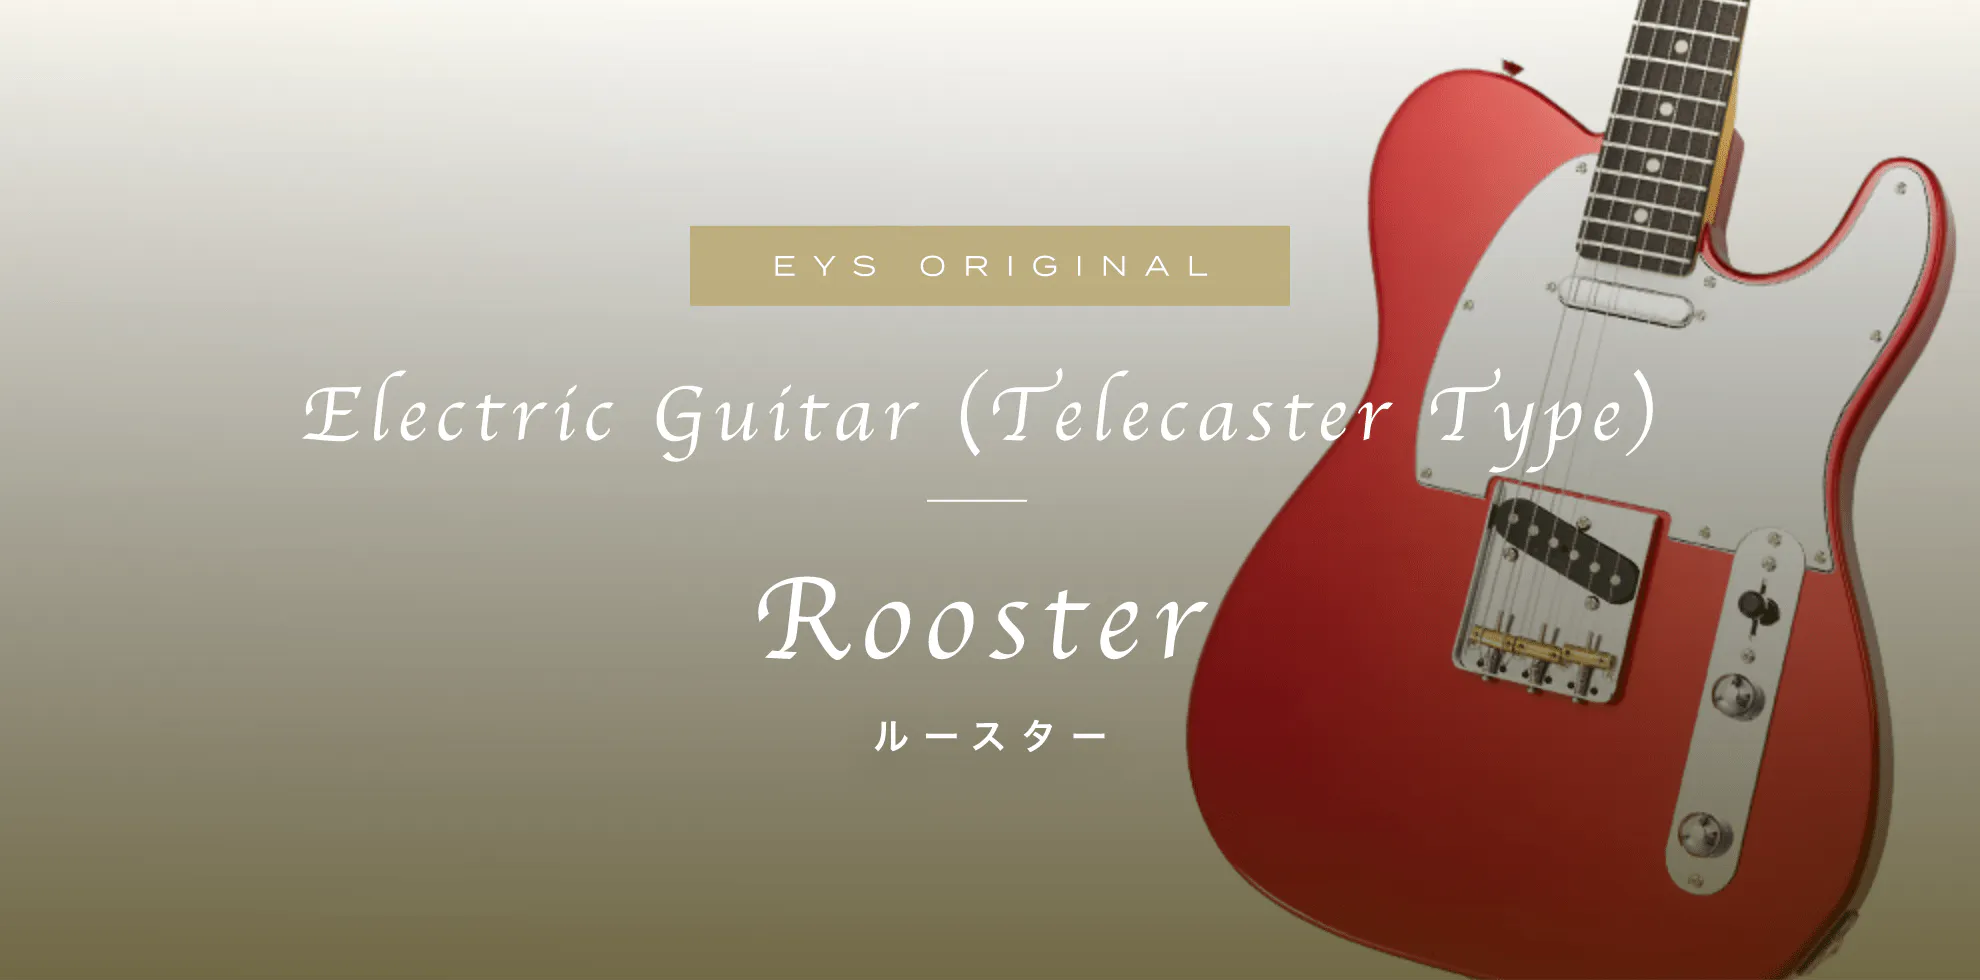 EYS ORIGINAL Electric Guitar (Telecaster Type) Rooster ルースター